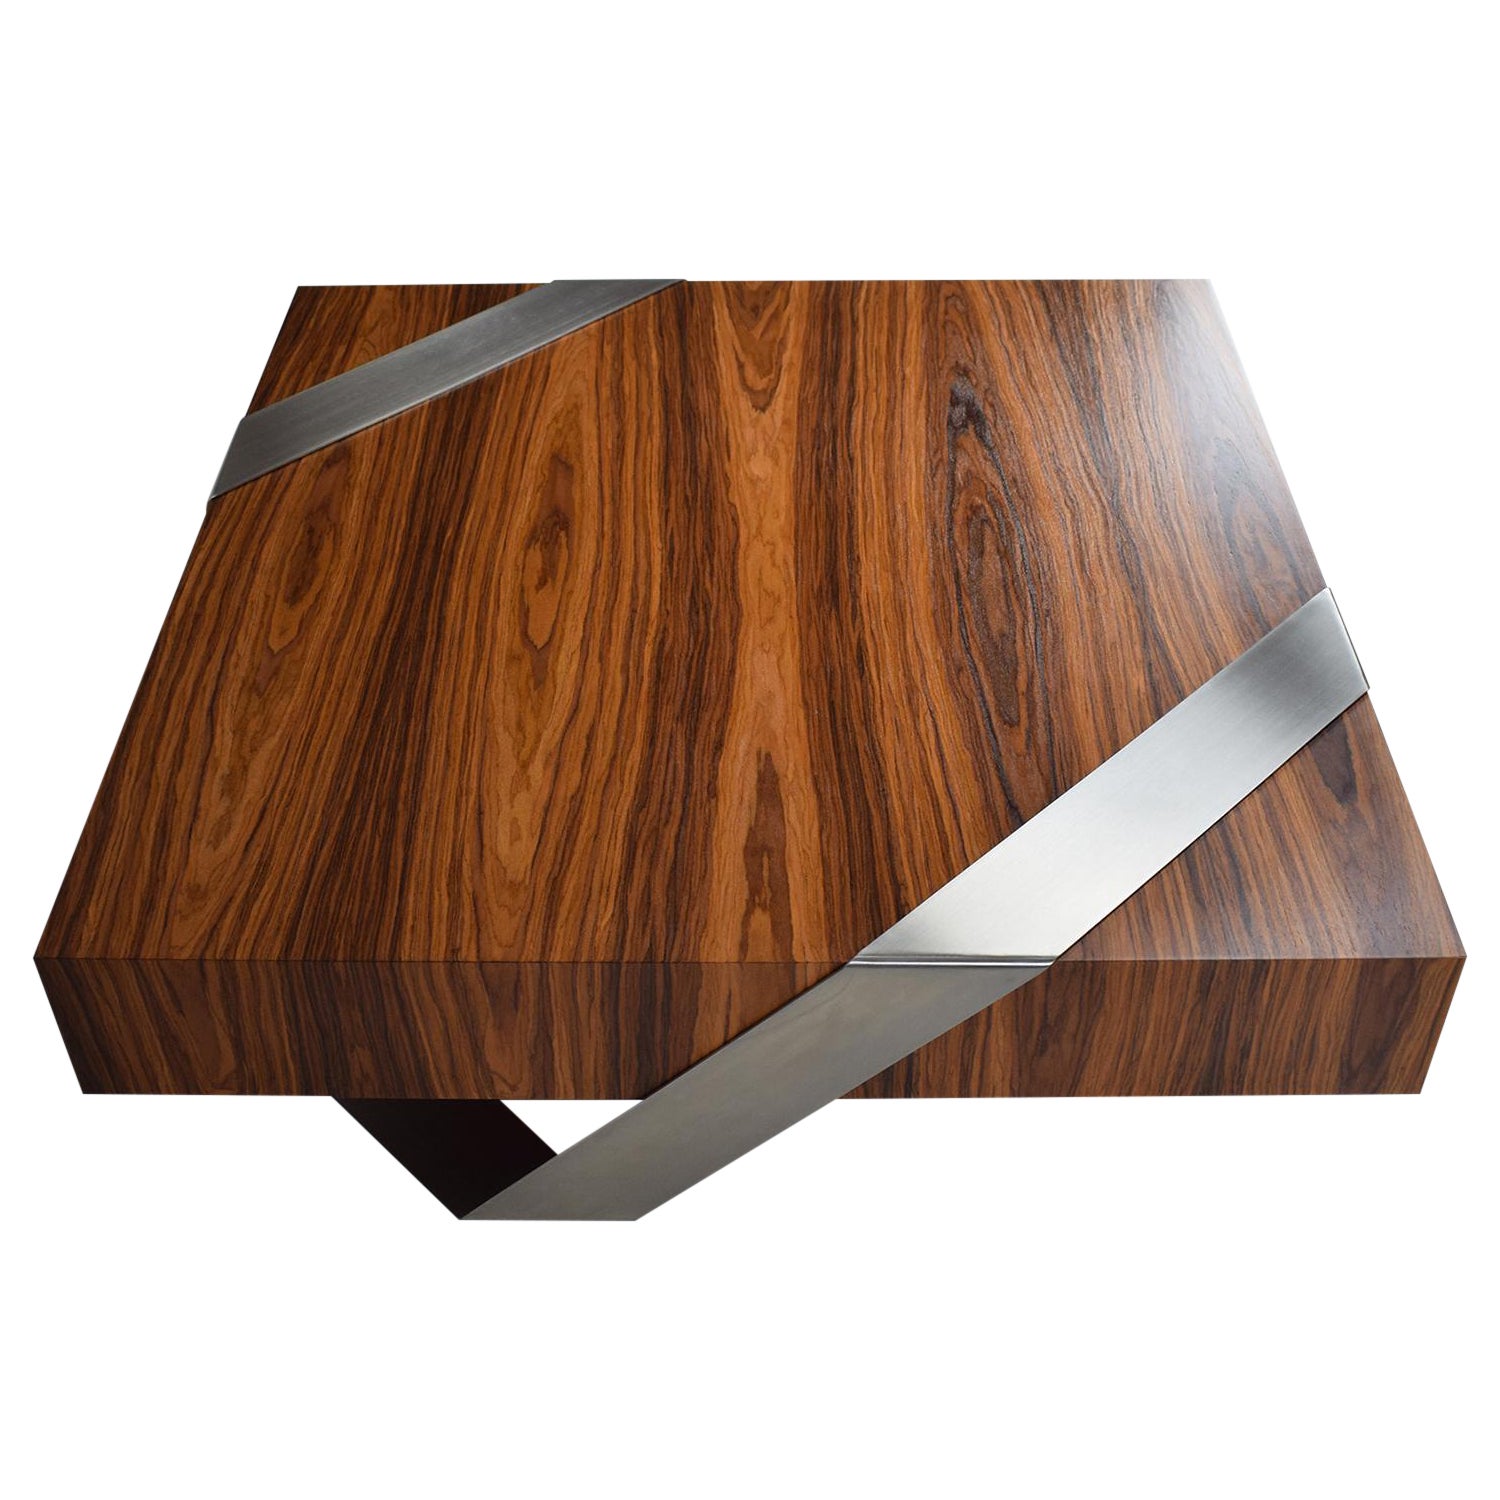 Portuguese Modern Minimalist Square Center Coffee Table Ironwood Brushed Stainless Steel